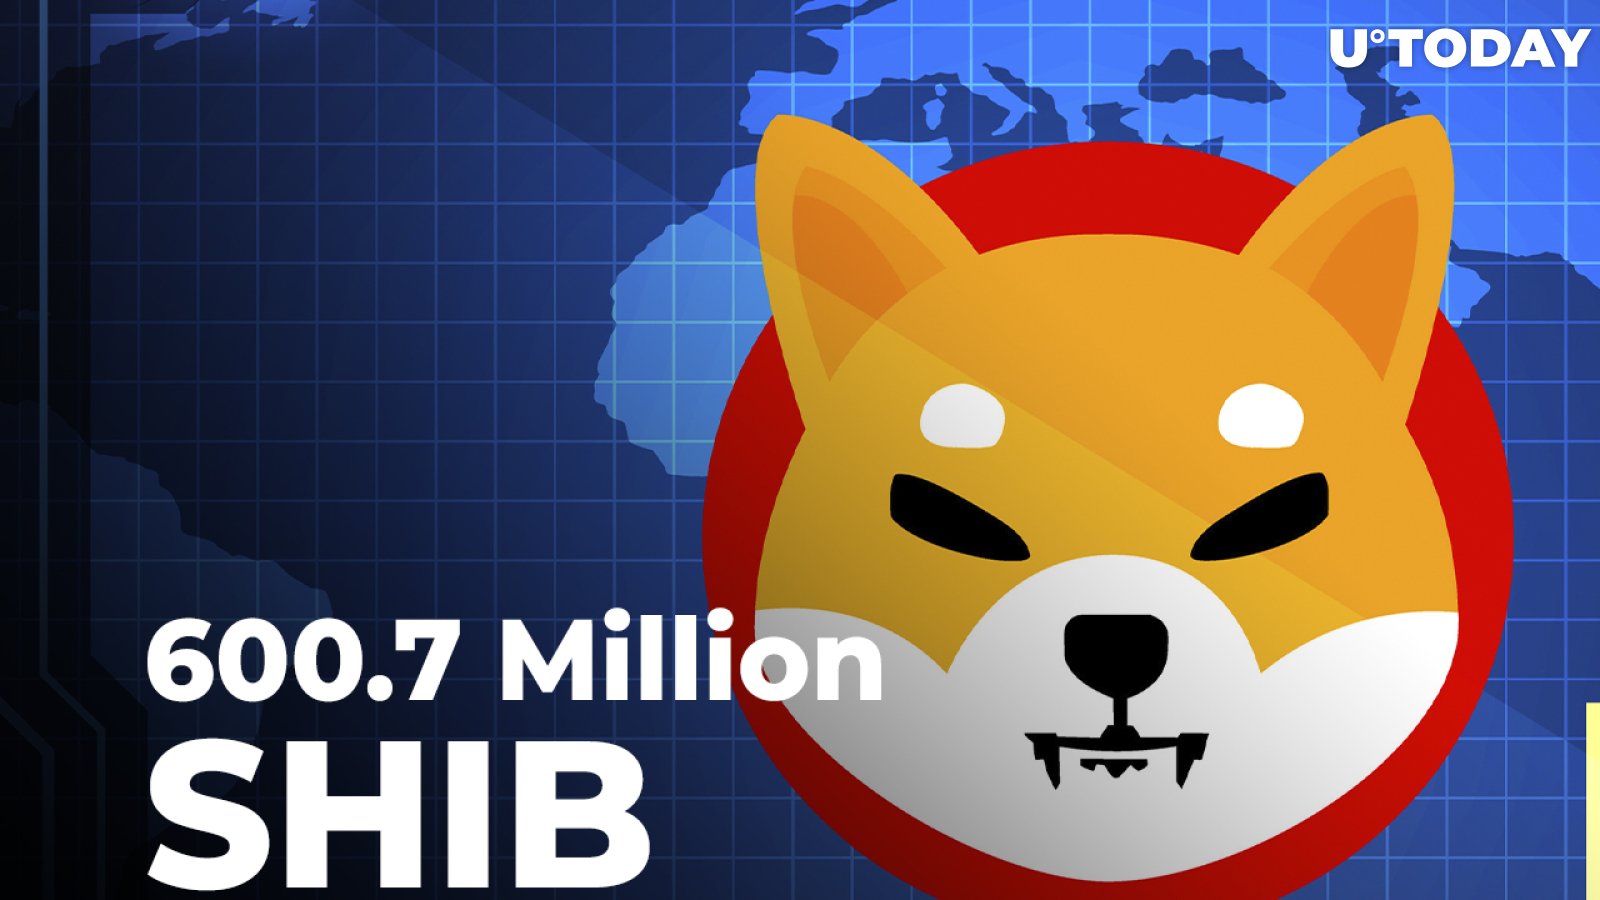 600.7 Million SHIB Burned in 5 Transfers by Shiba Inu Fans, Here's What Happened